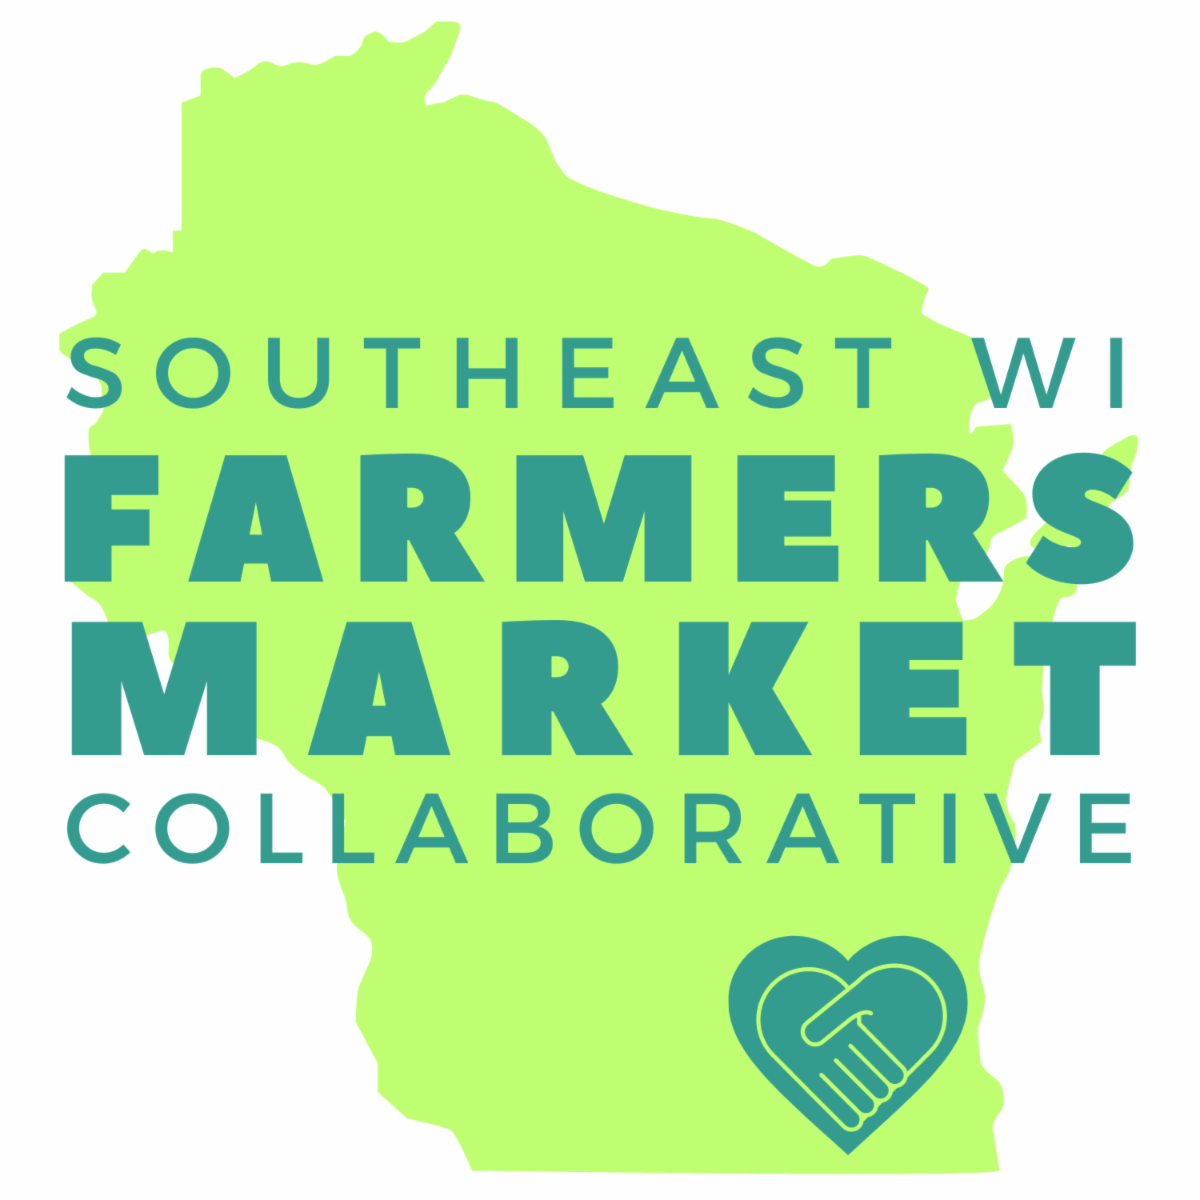 Announcing the Creation of the Southeast Wisconsin Farmers Market Collaborative